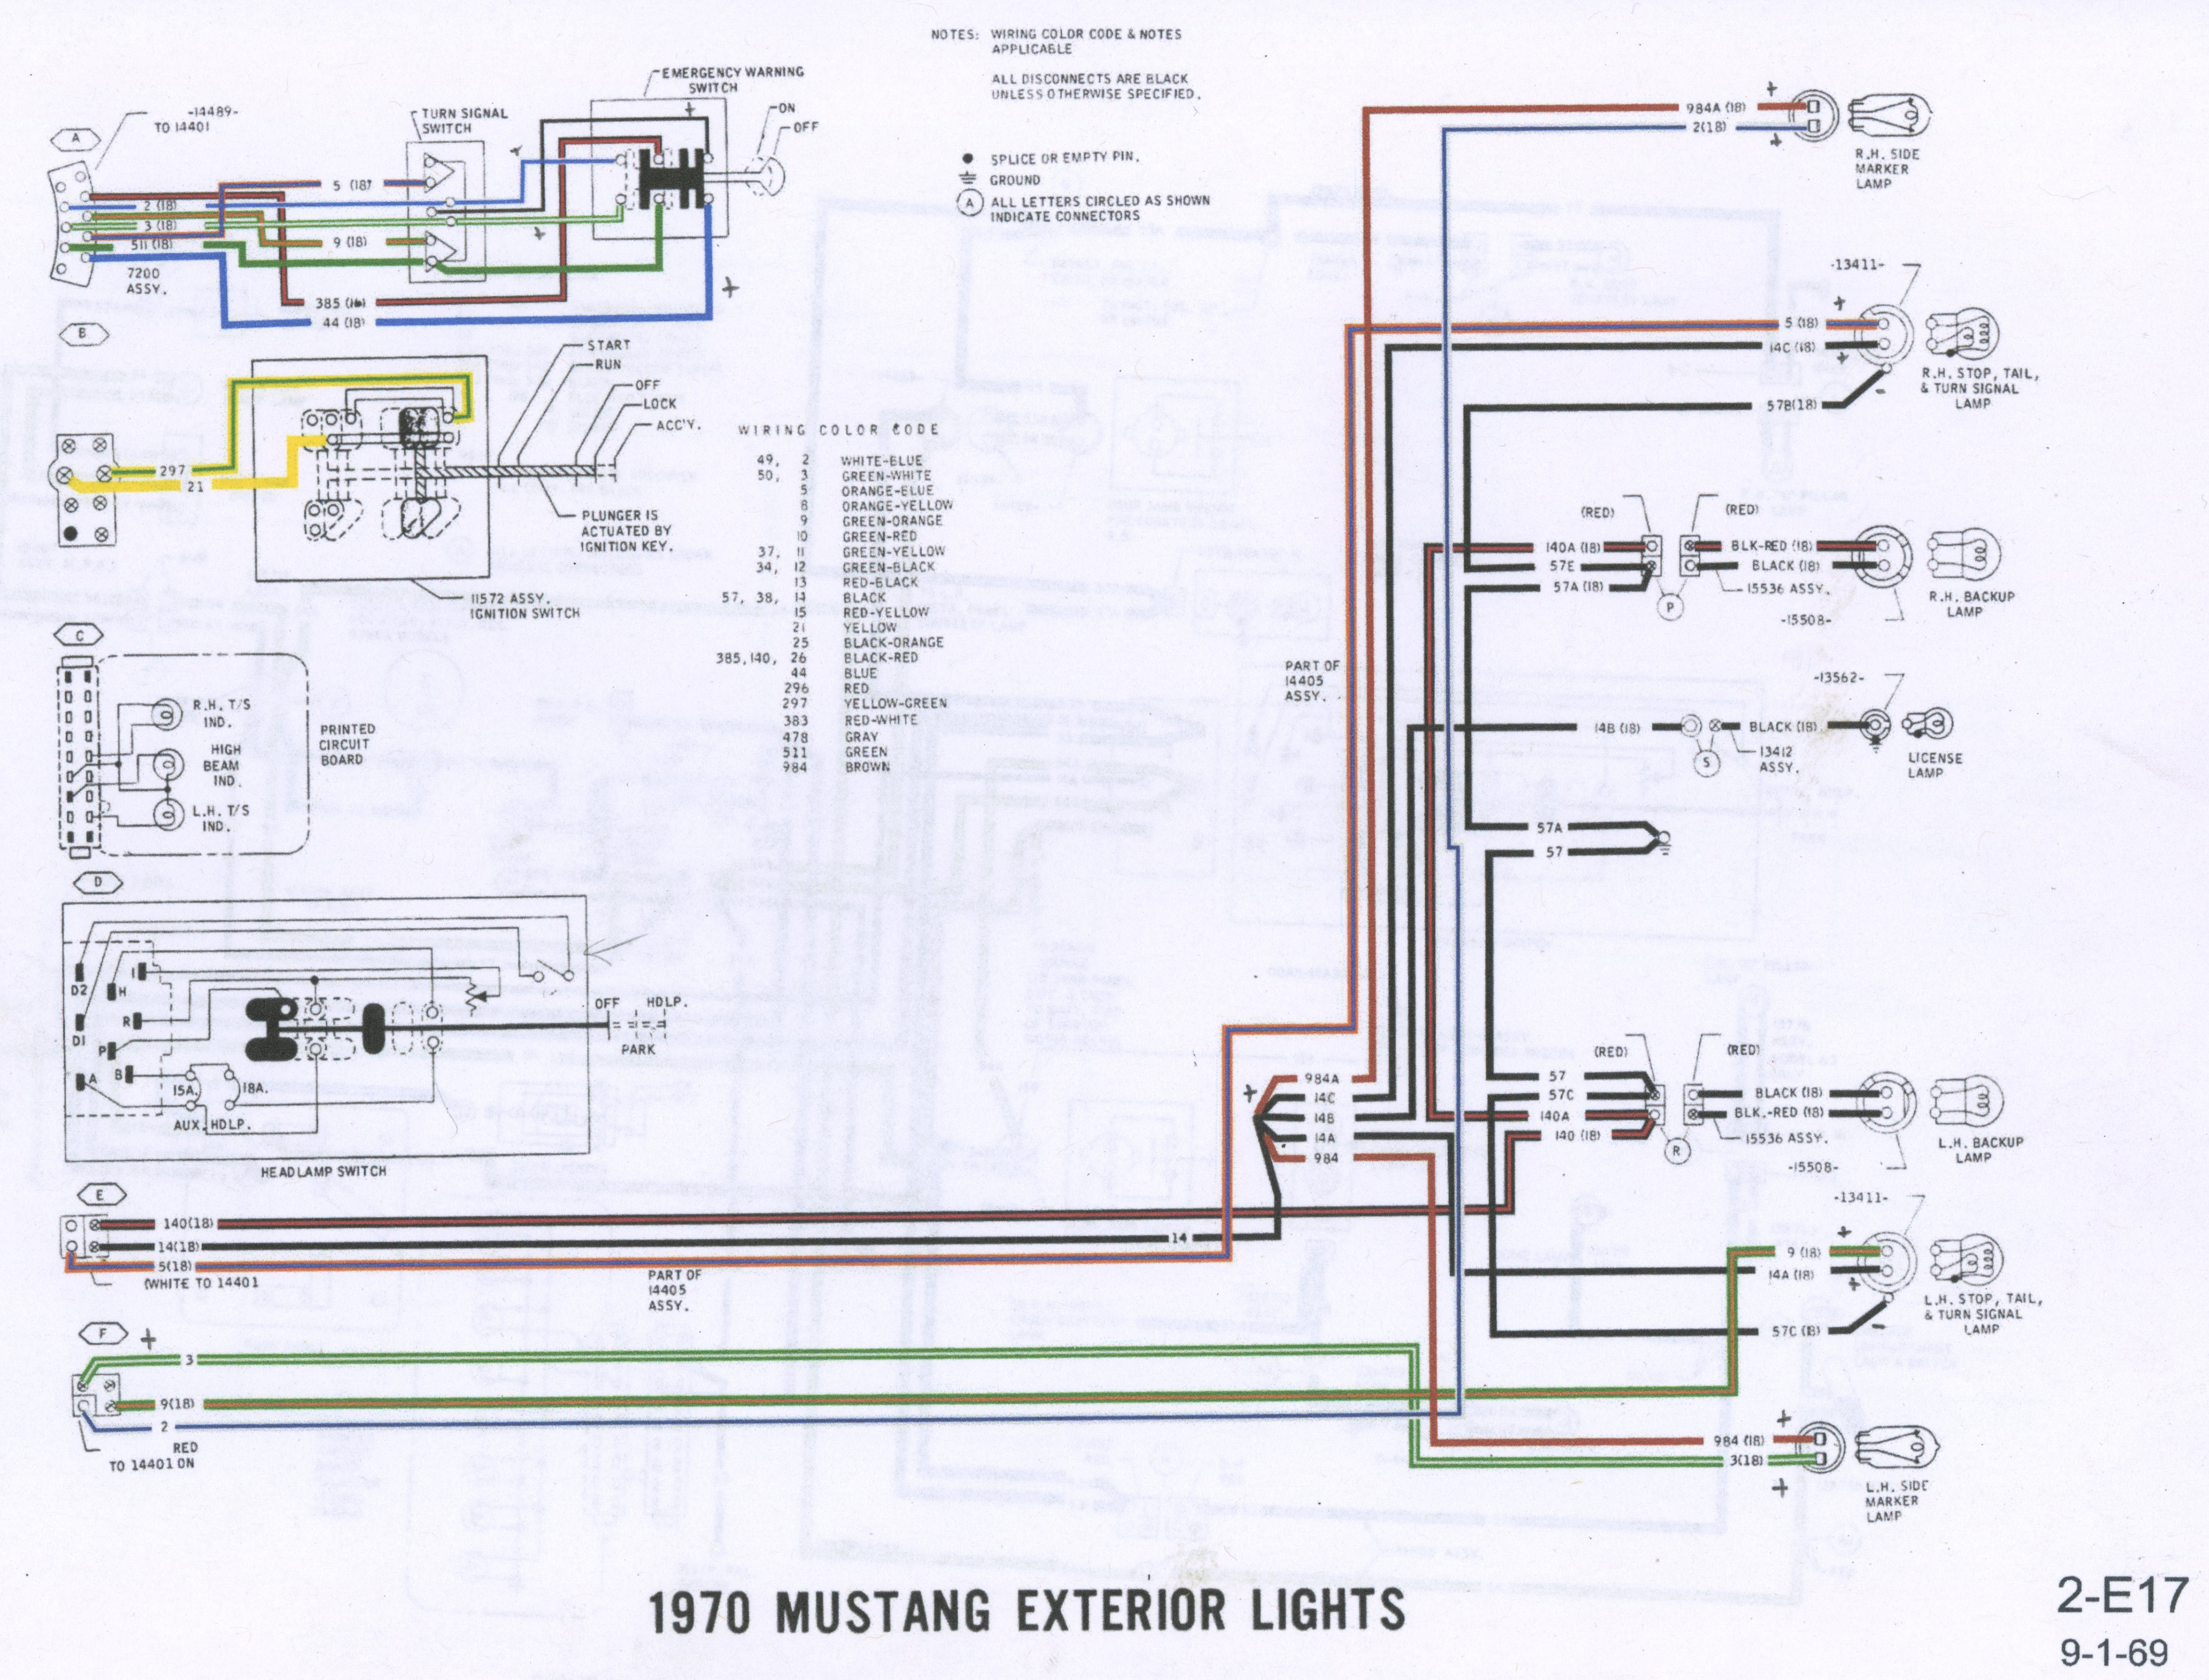 1970 Mustang Exterior Lights (turn signals) - Page 2 - How to's